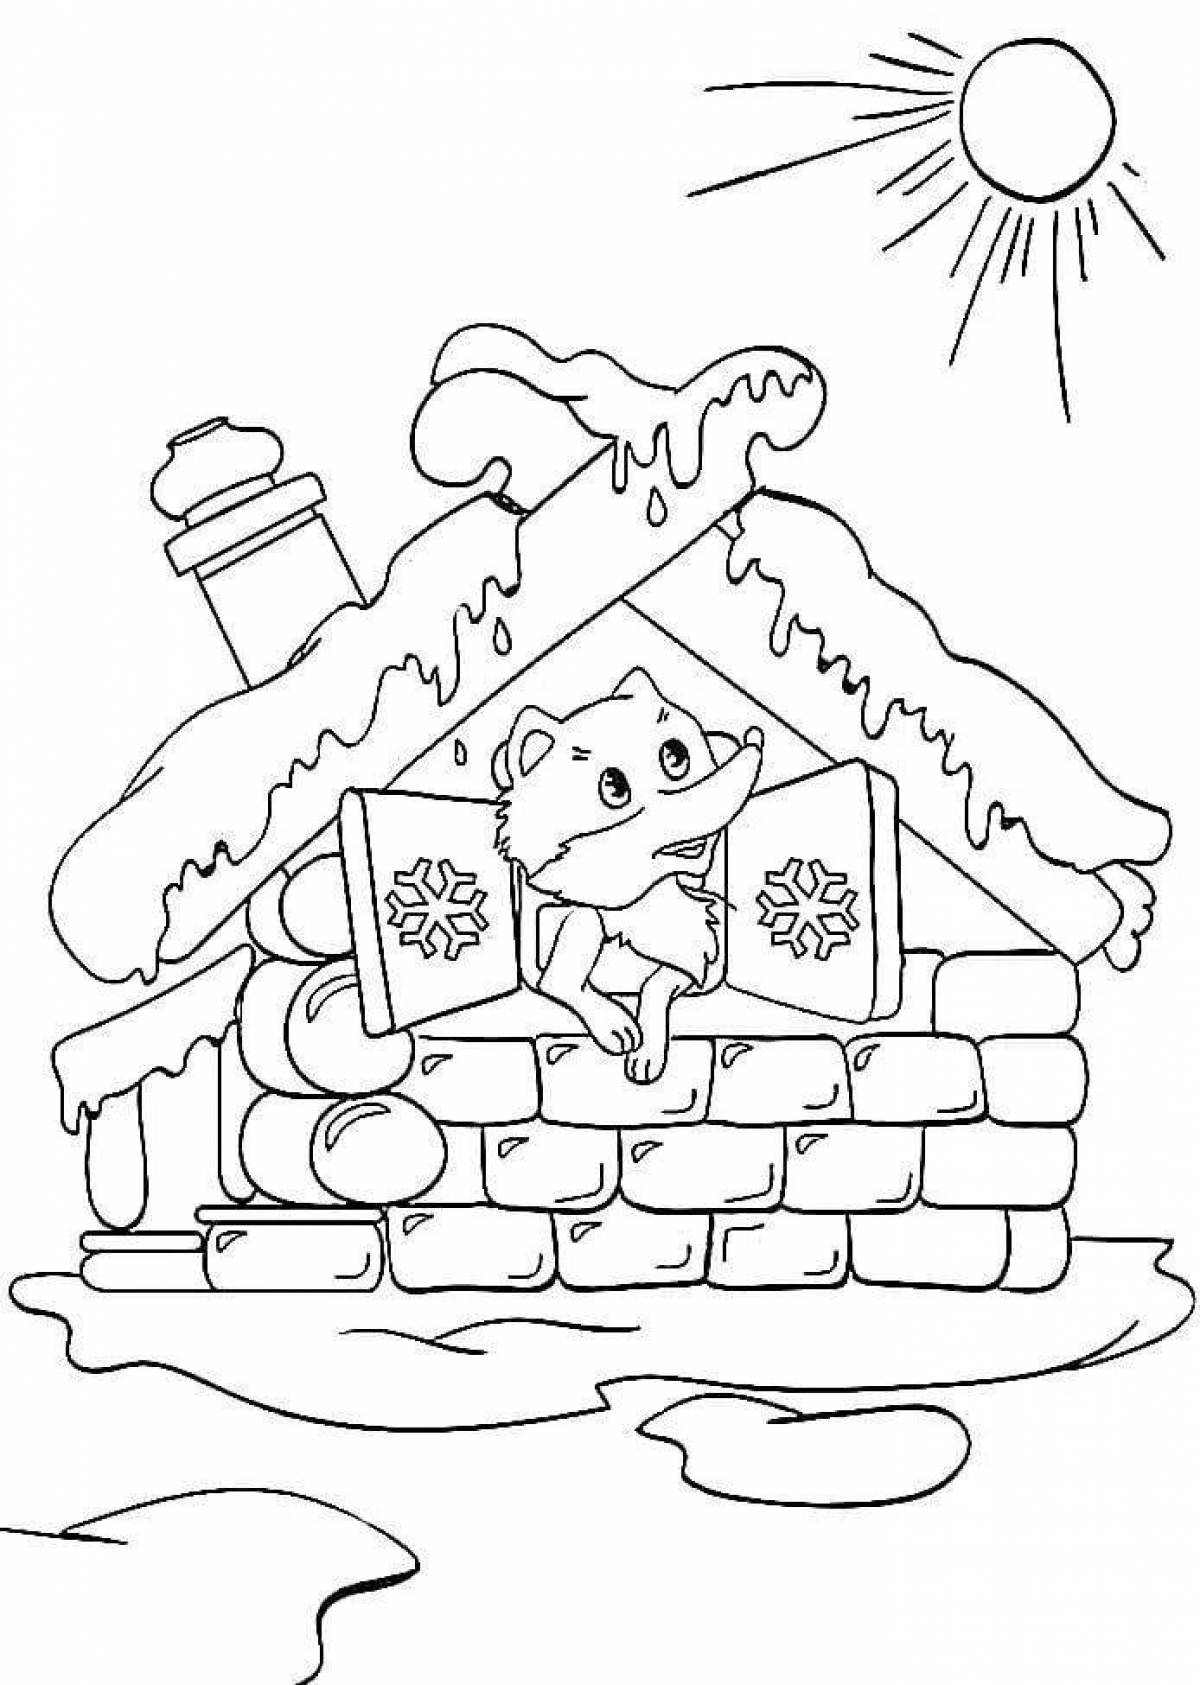 Impressive bast and ice hut coloring page